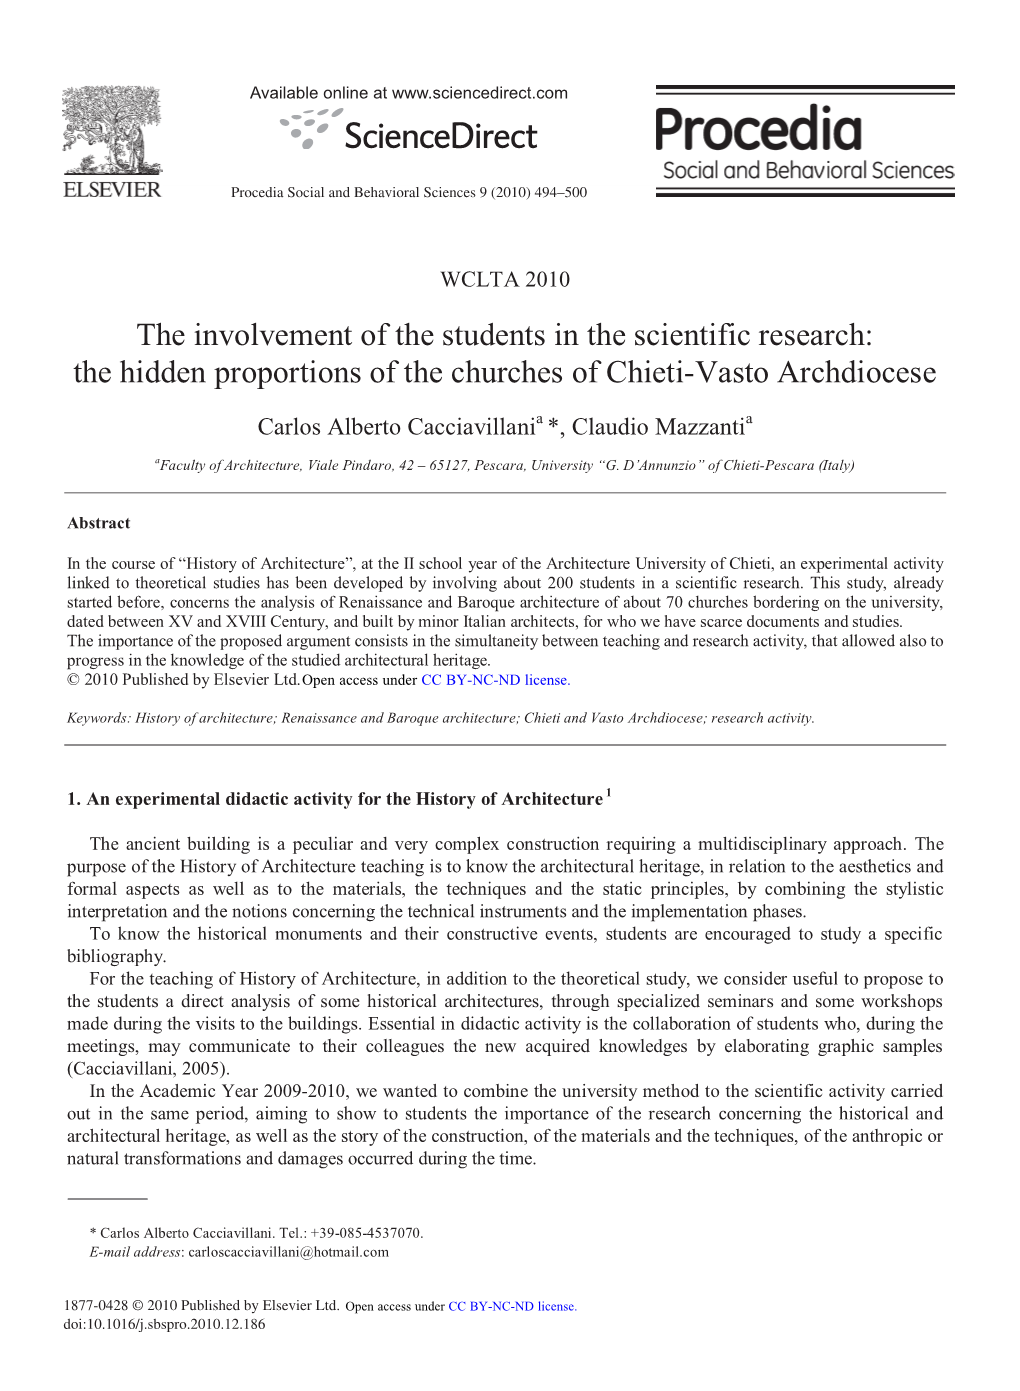 The Involvement of the Students in the Scientific Research: the Hidden Proportions of the Churches of Chieti-Vasto Archdiocese